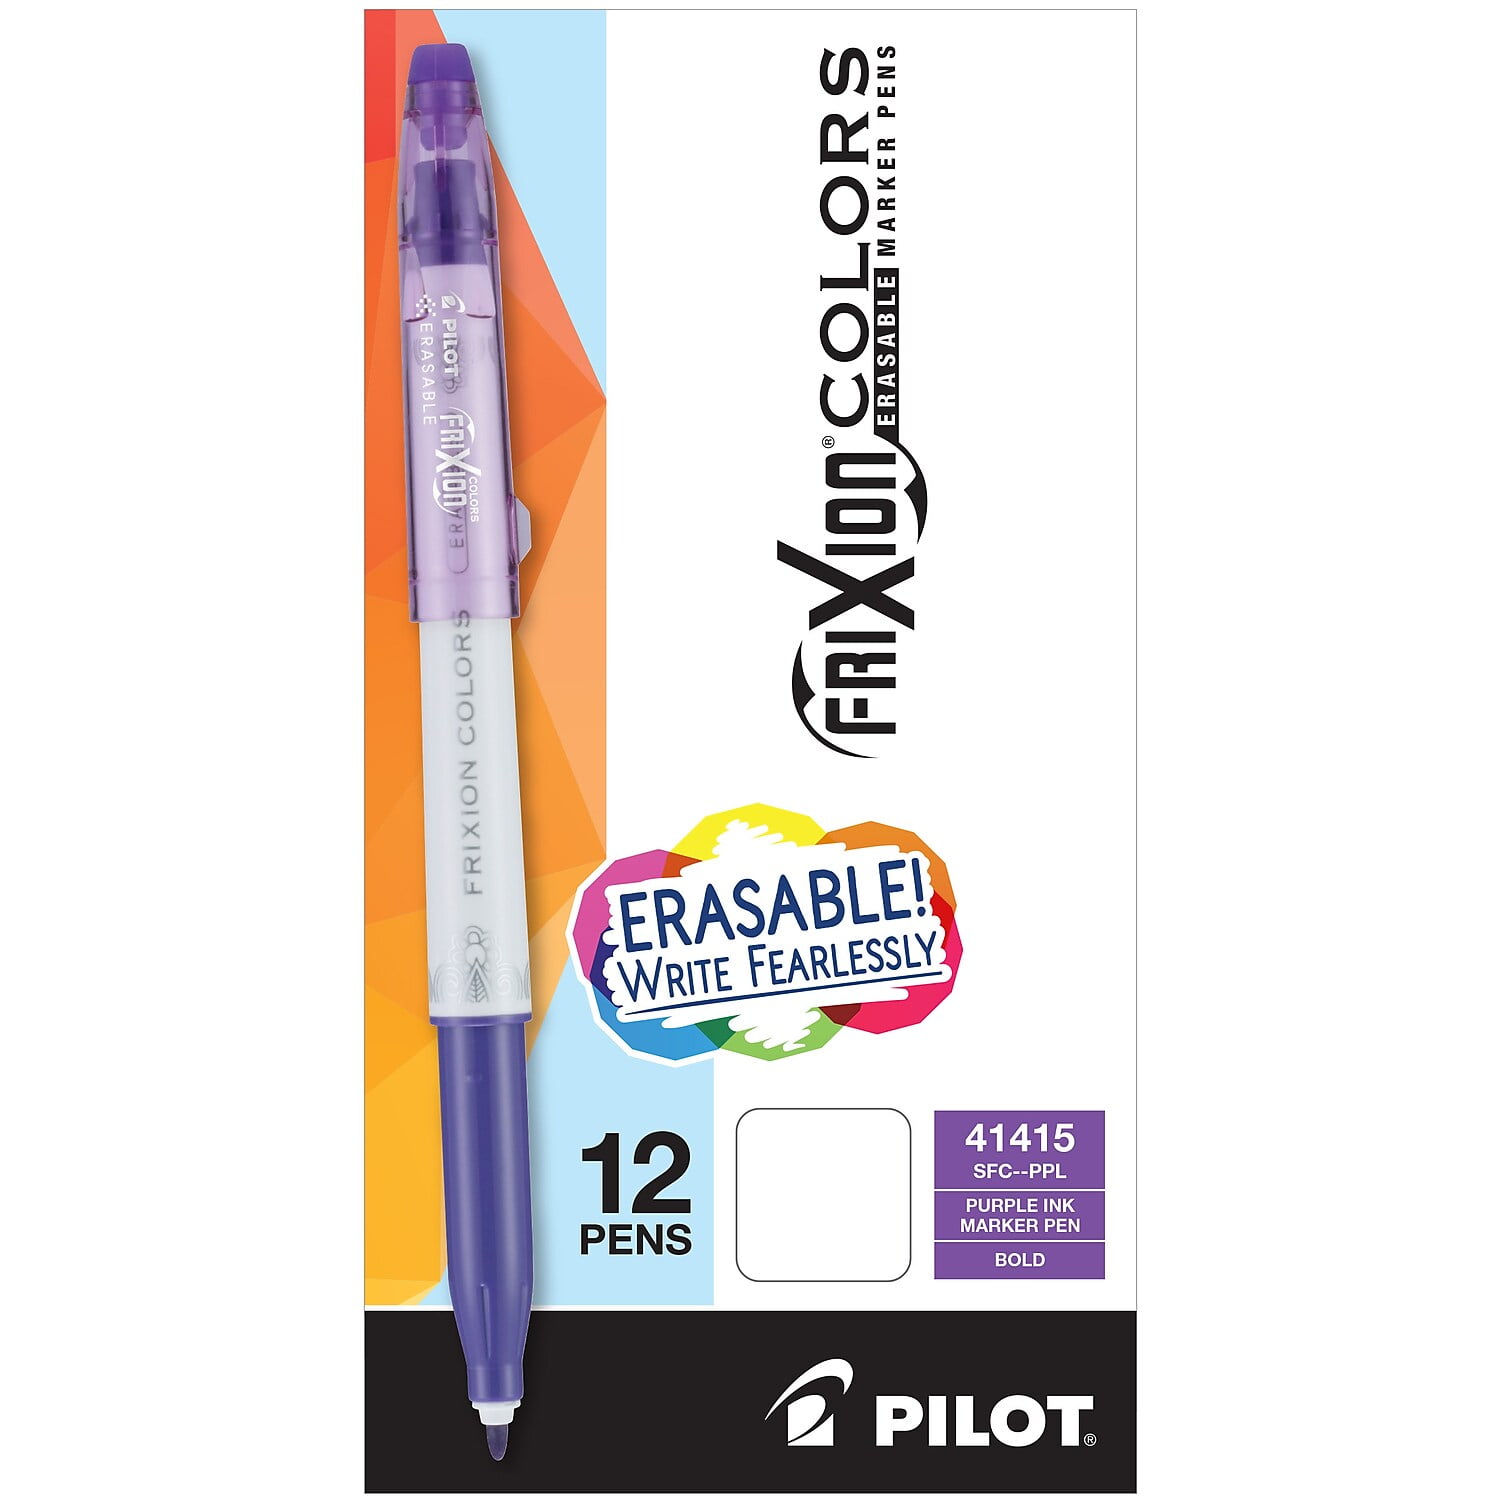 Erasable Gel Pens, 15 Colors Lineon Retractable Erasable Pens Clicker, Fine Point, Make Mistakes Disappear, Assorted Color Inks for Drawing Writing